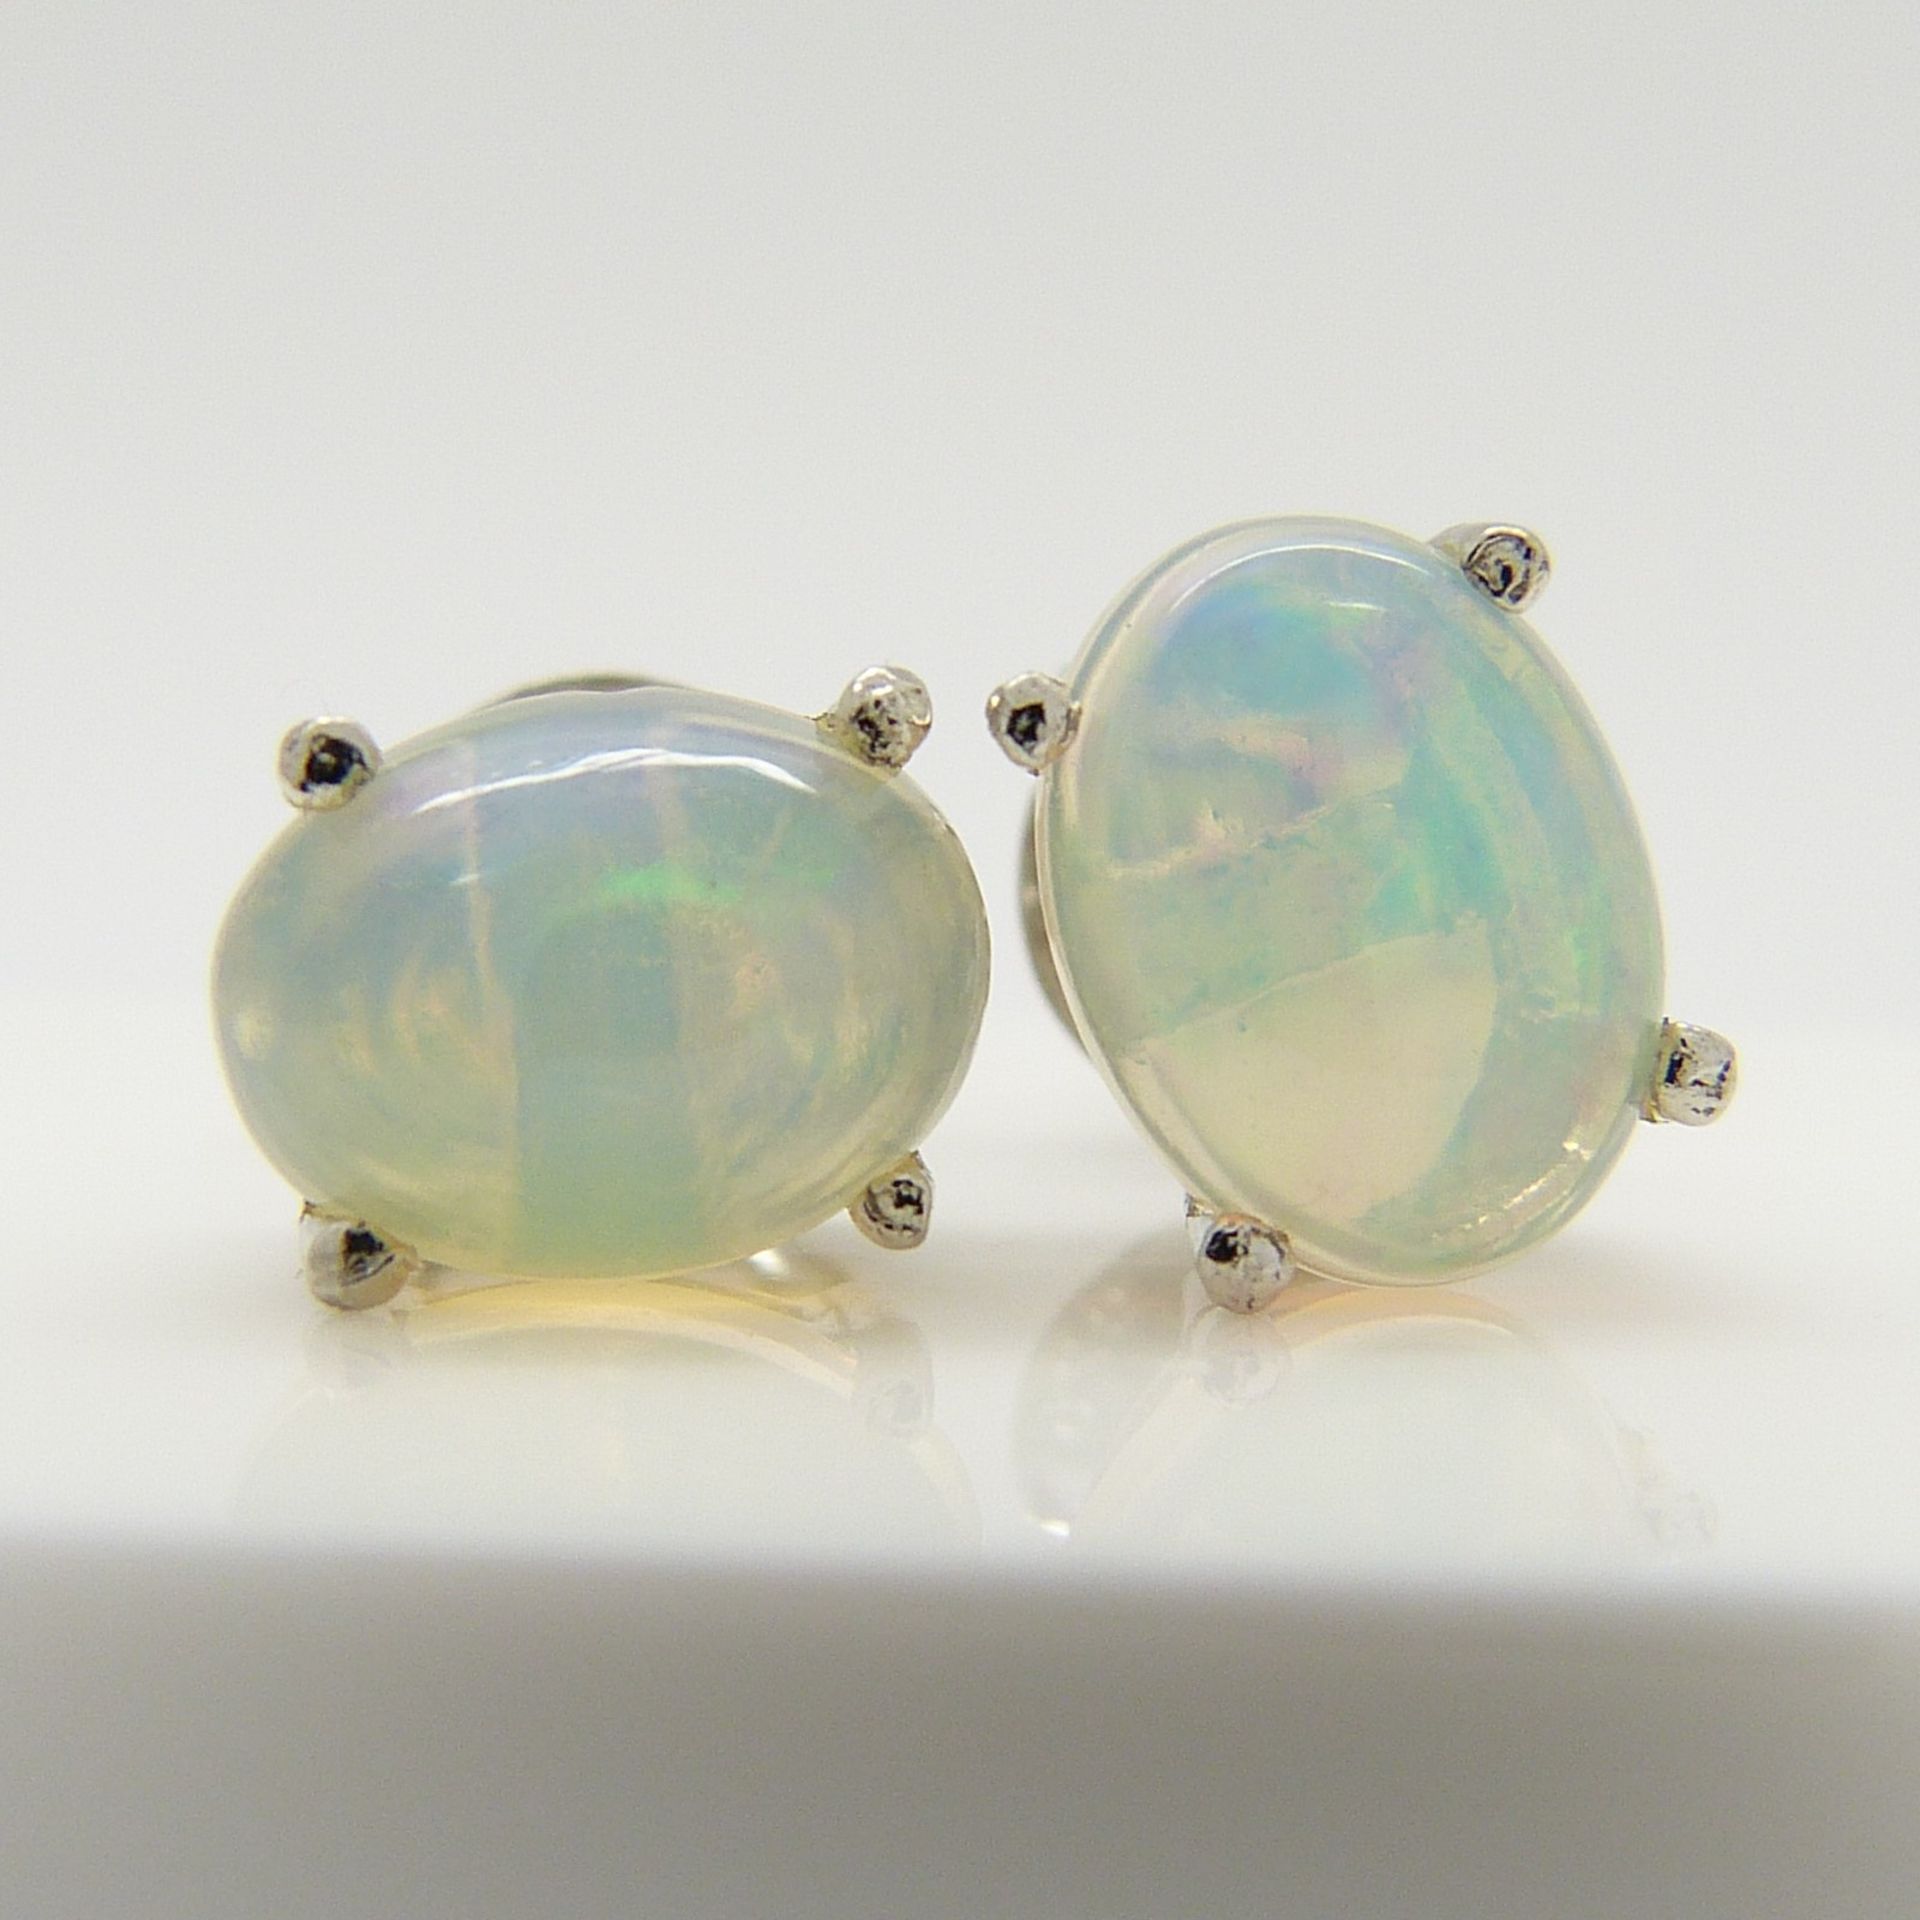 A pair of silver ear studs set with cabochon white opals, 1.30 carats (approx) - Image 2 of 5